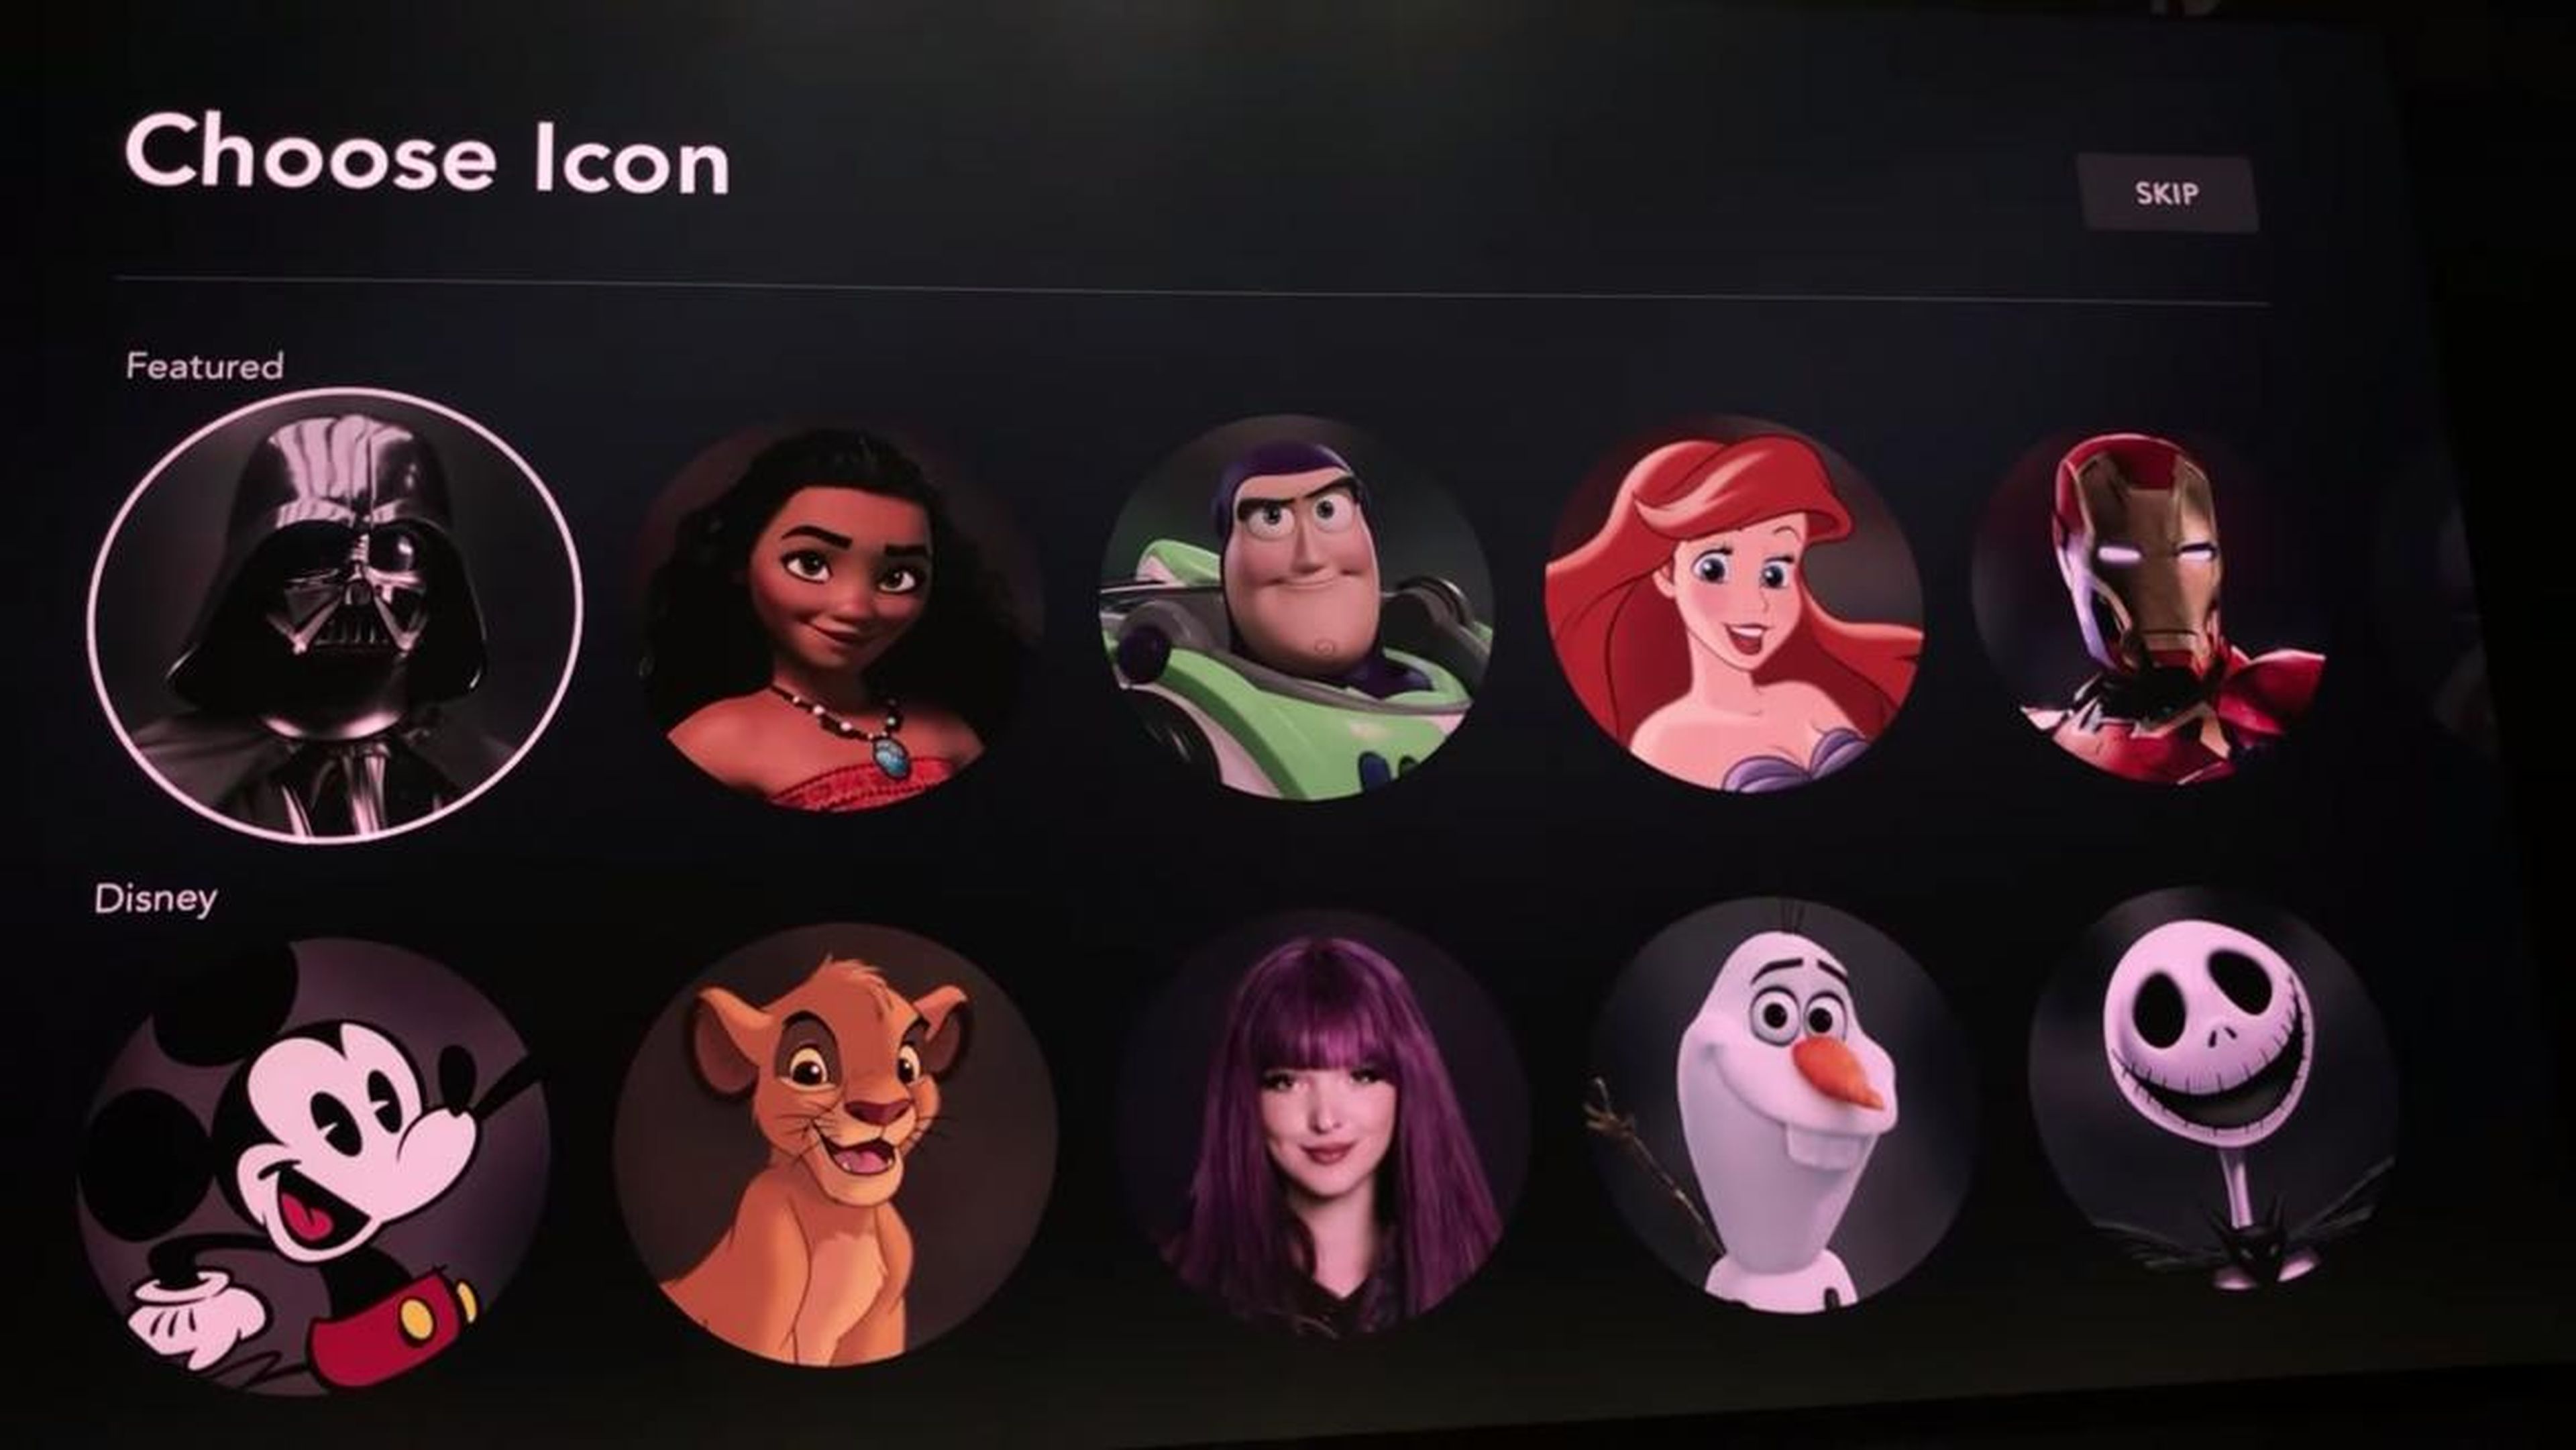 You just type your name and pick from a wide variety of icons from Disney's various properties.